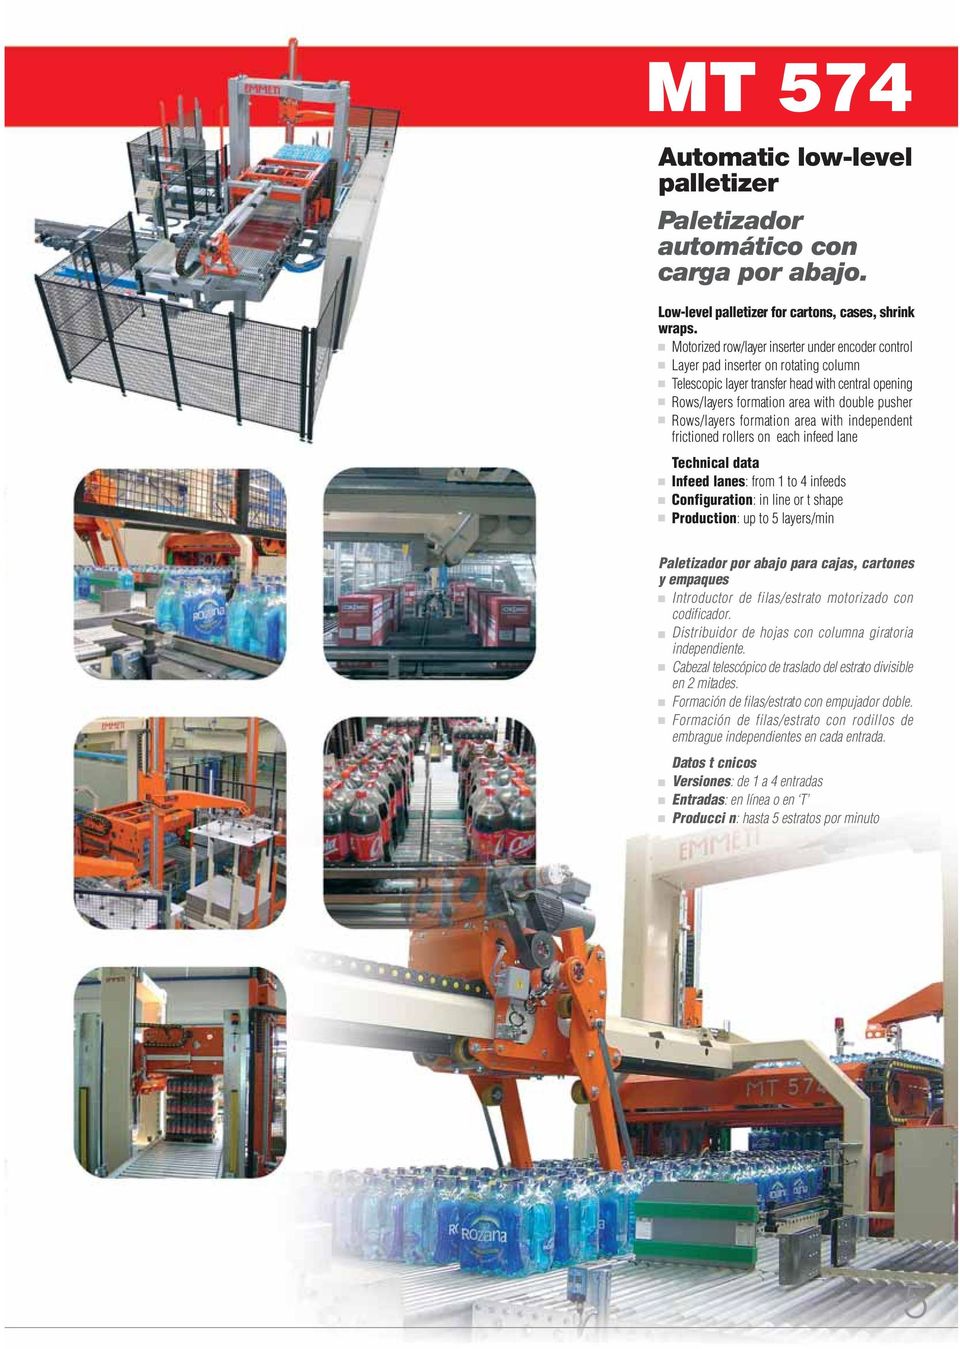 formation area with independent frictioned rollers on each infeed lane Technical data Infeed lanes: from 1 to 4 infeeds Configuration: in line or t shape Production: up to 5 layers/min Paletizador